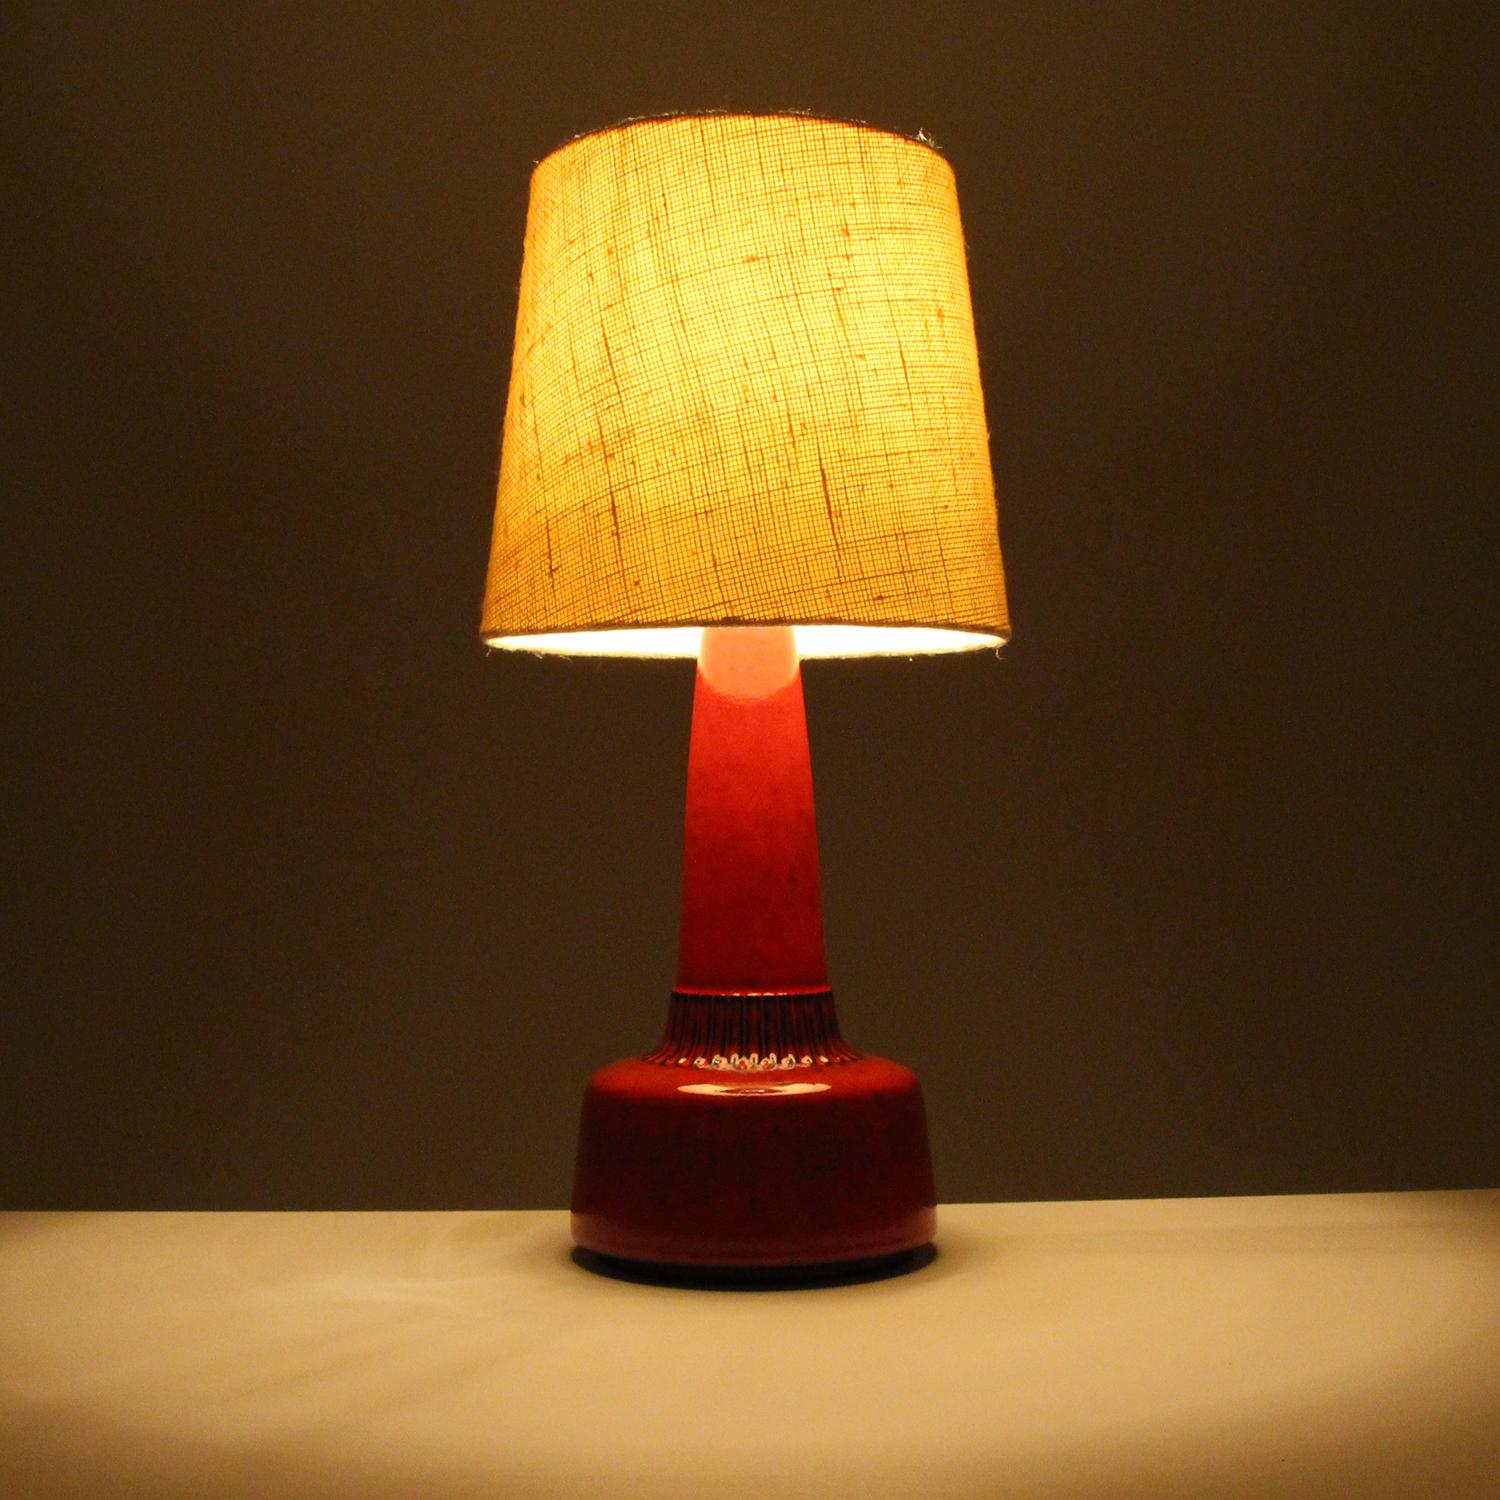 Danish Red Table Lamp No. 1080-2 by Einar Johansen for Soholm, 1960s, Shade Included